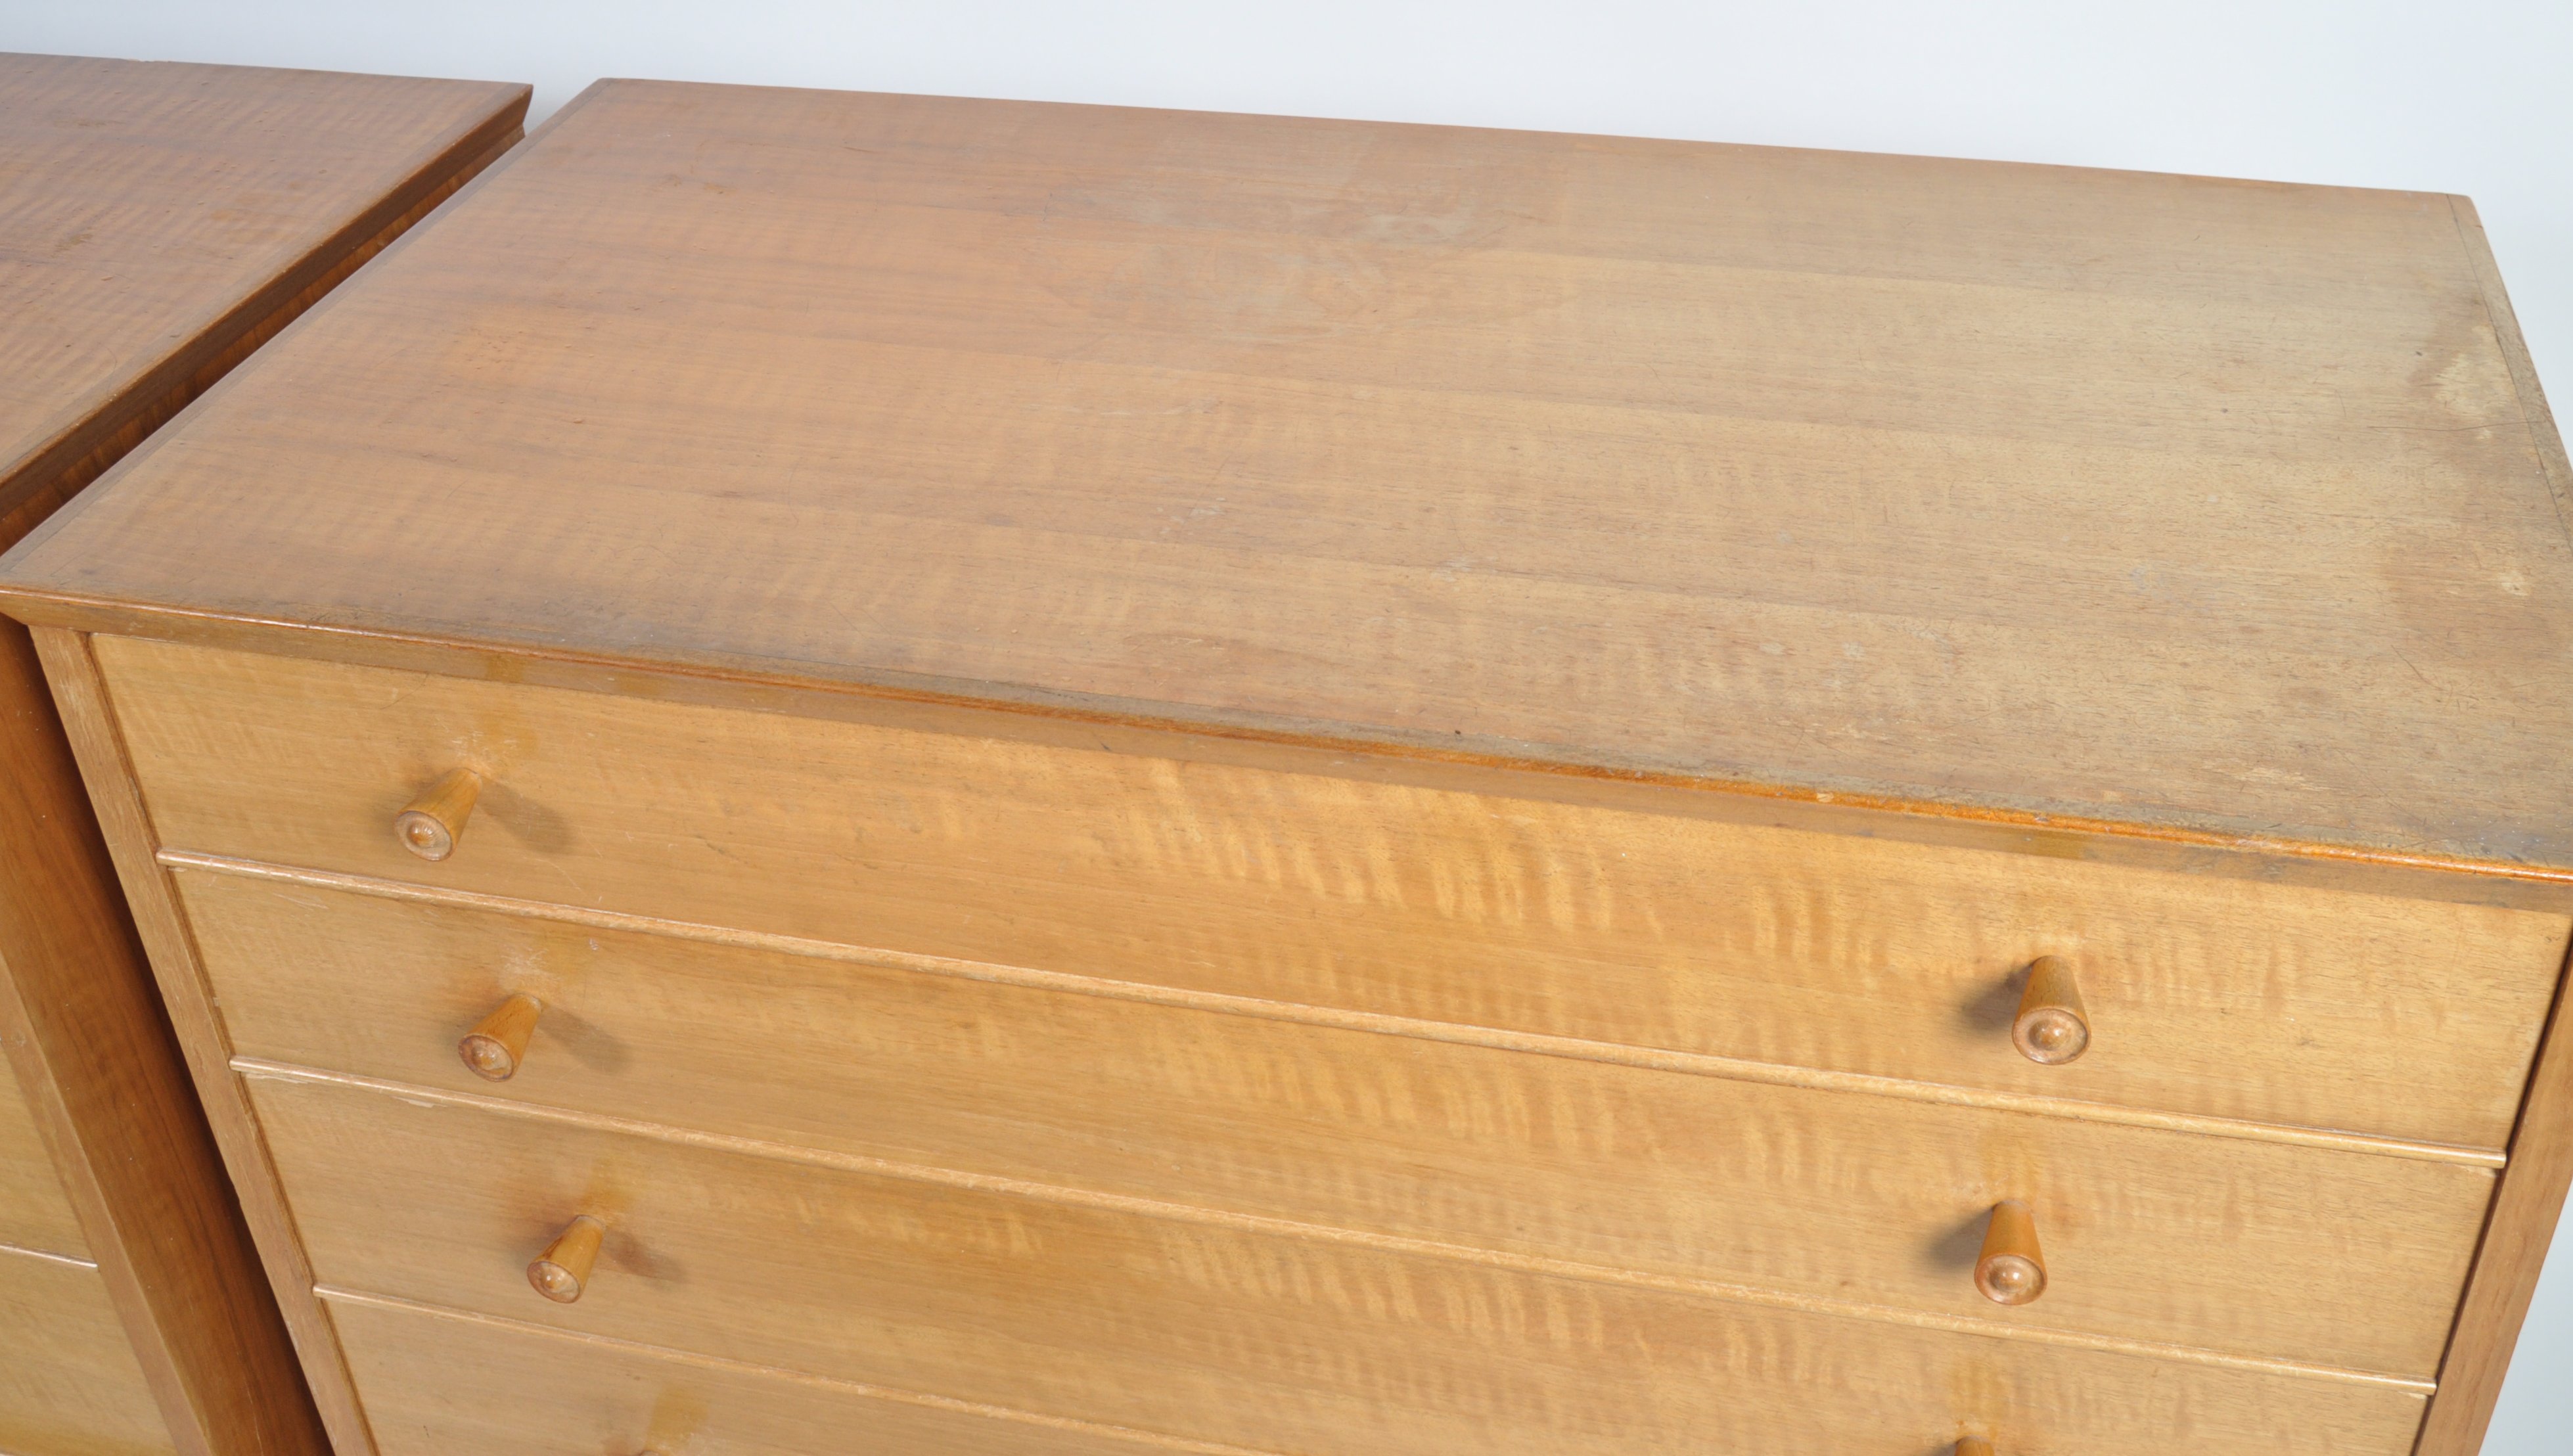 AC FURNITURE MID CENTURY CHESTS OF DRAWERS BY ALFR - Image 5 of 7